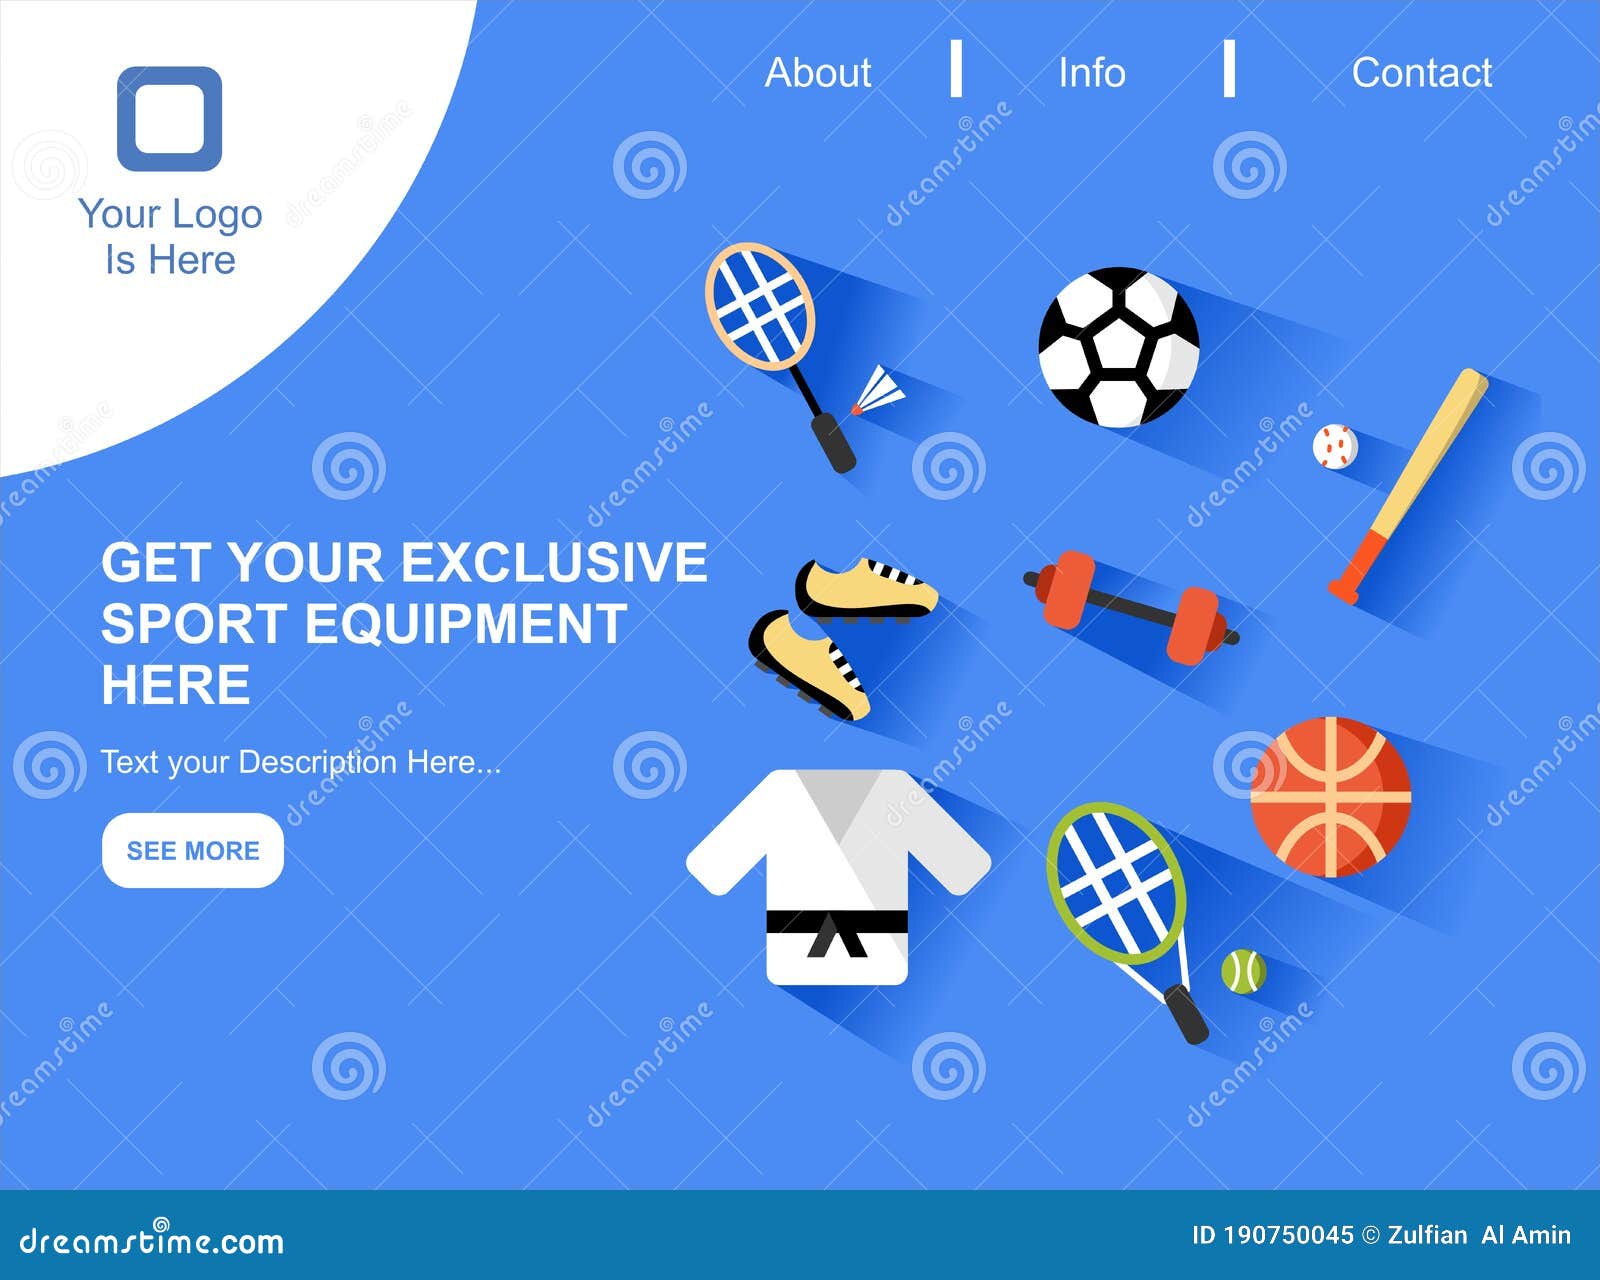 Website Landing Page of Sport Equipment Online Shop Stock Photo with Flat Illustration Free Vector Stock Vector